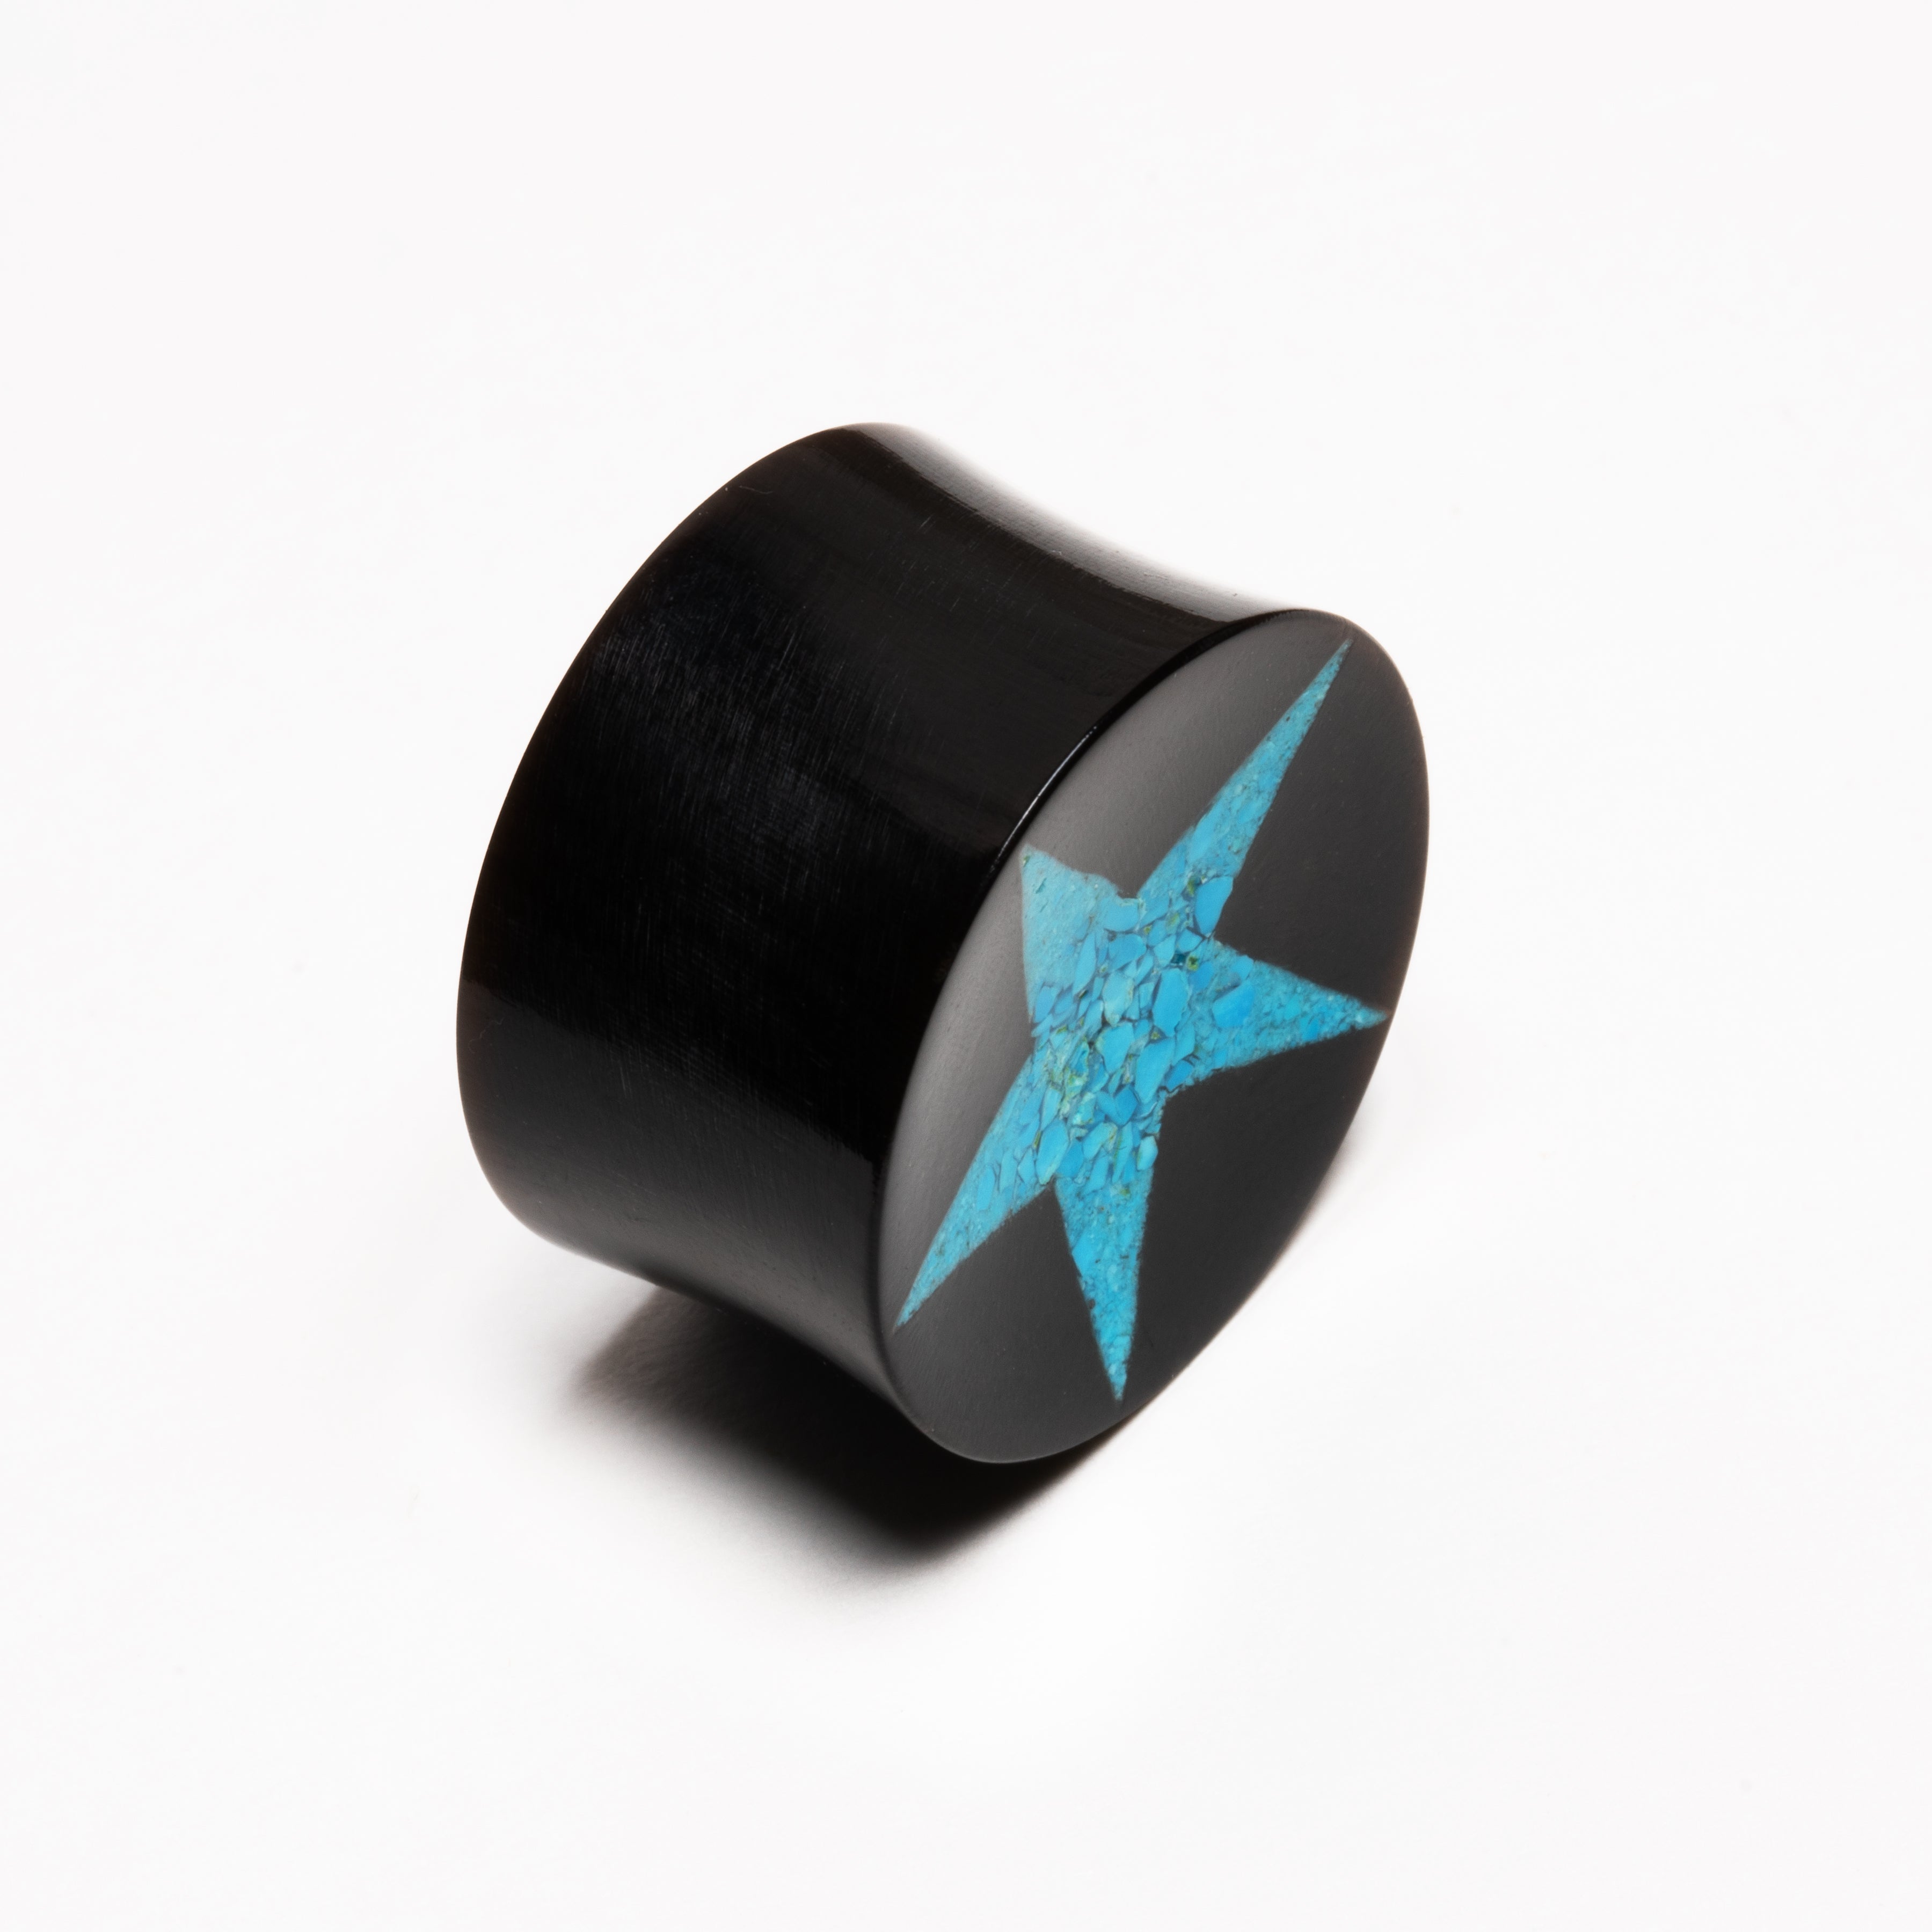 Horn And Turquoise Star Plug